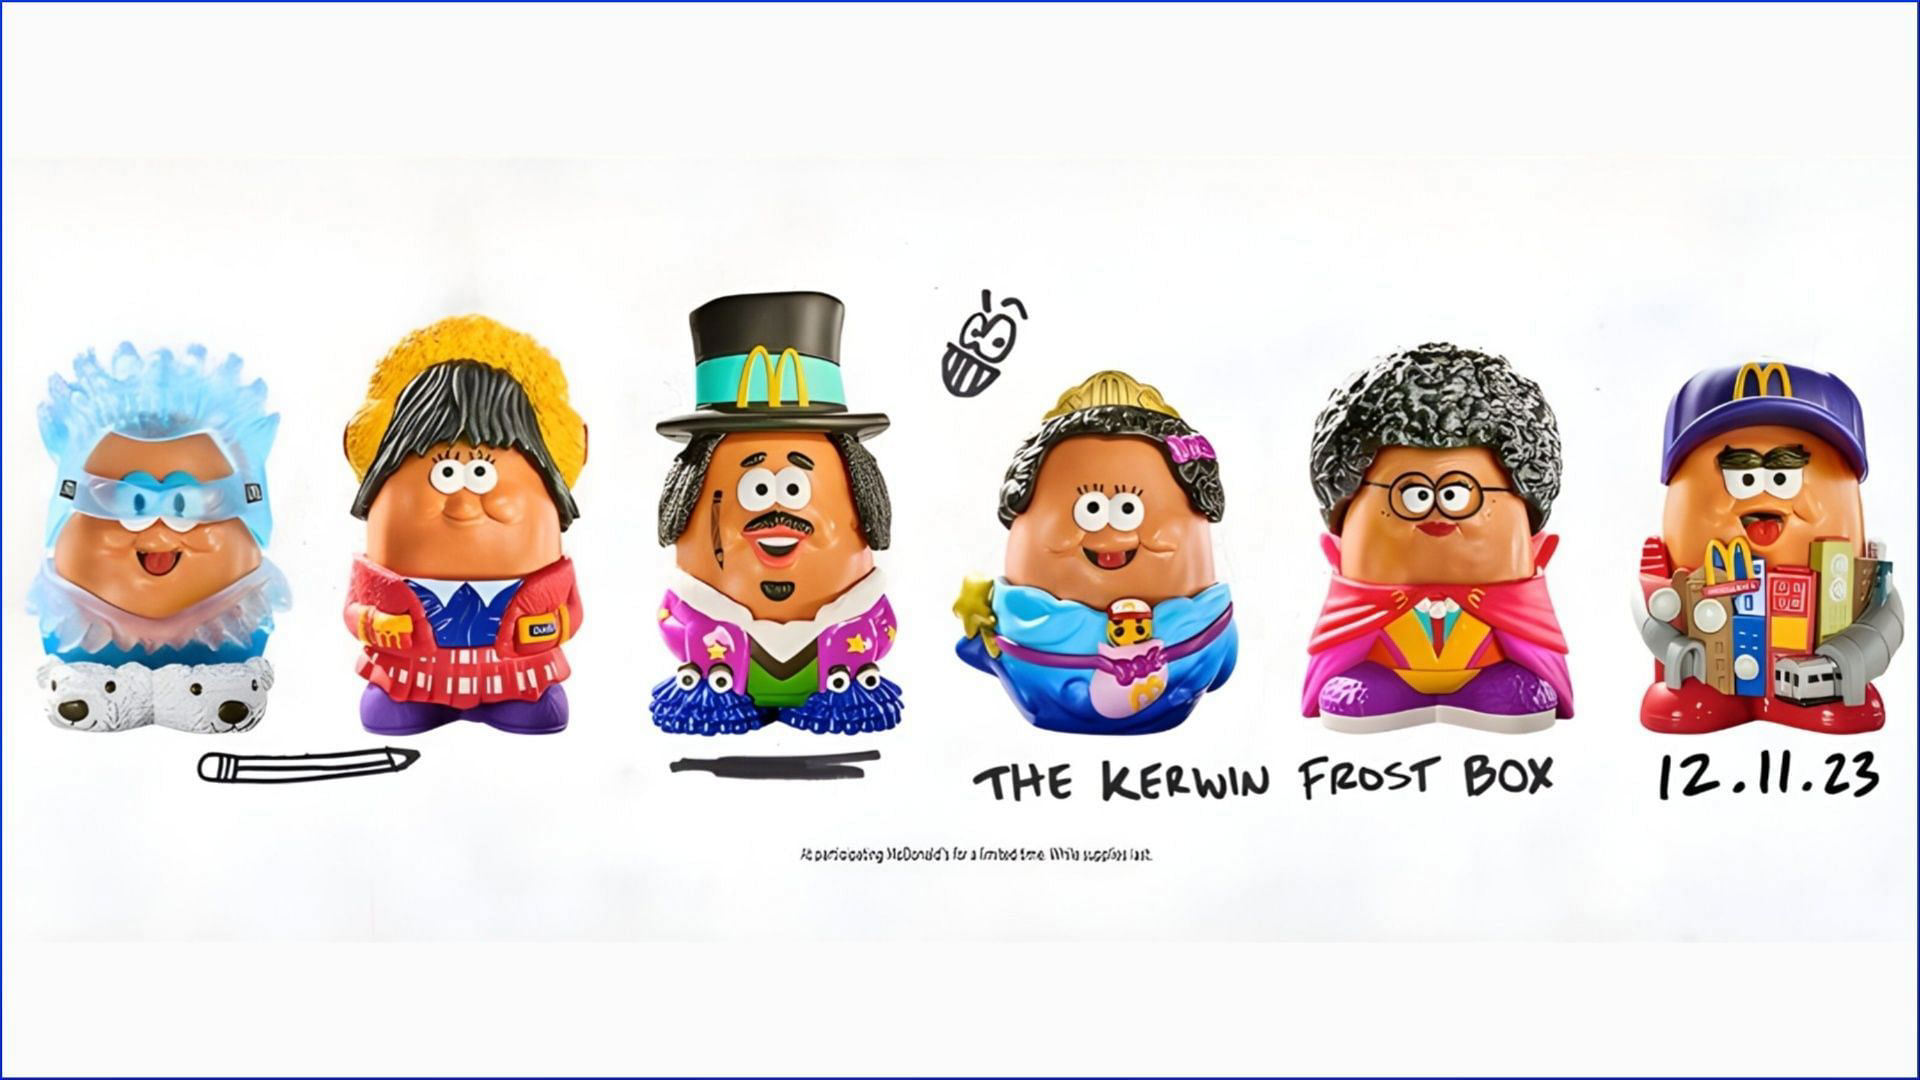 McDonald's McNugget Buddy Collectibles in collaboration with Kerwin